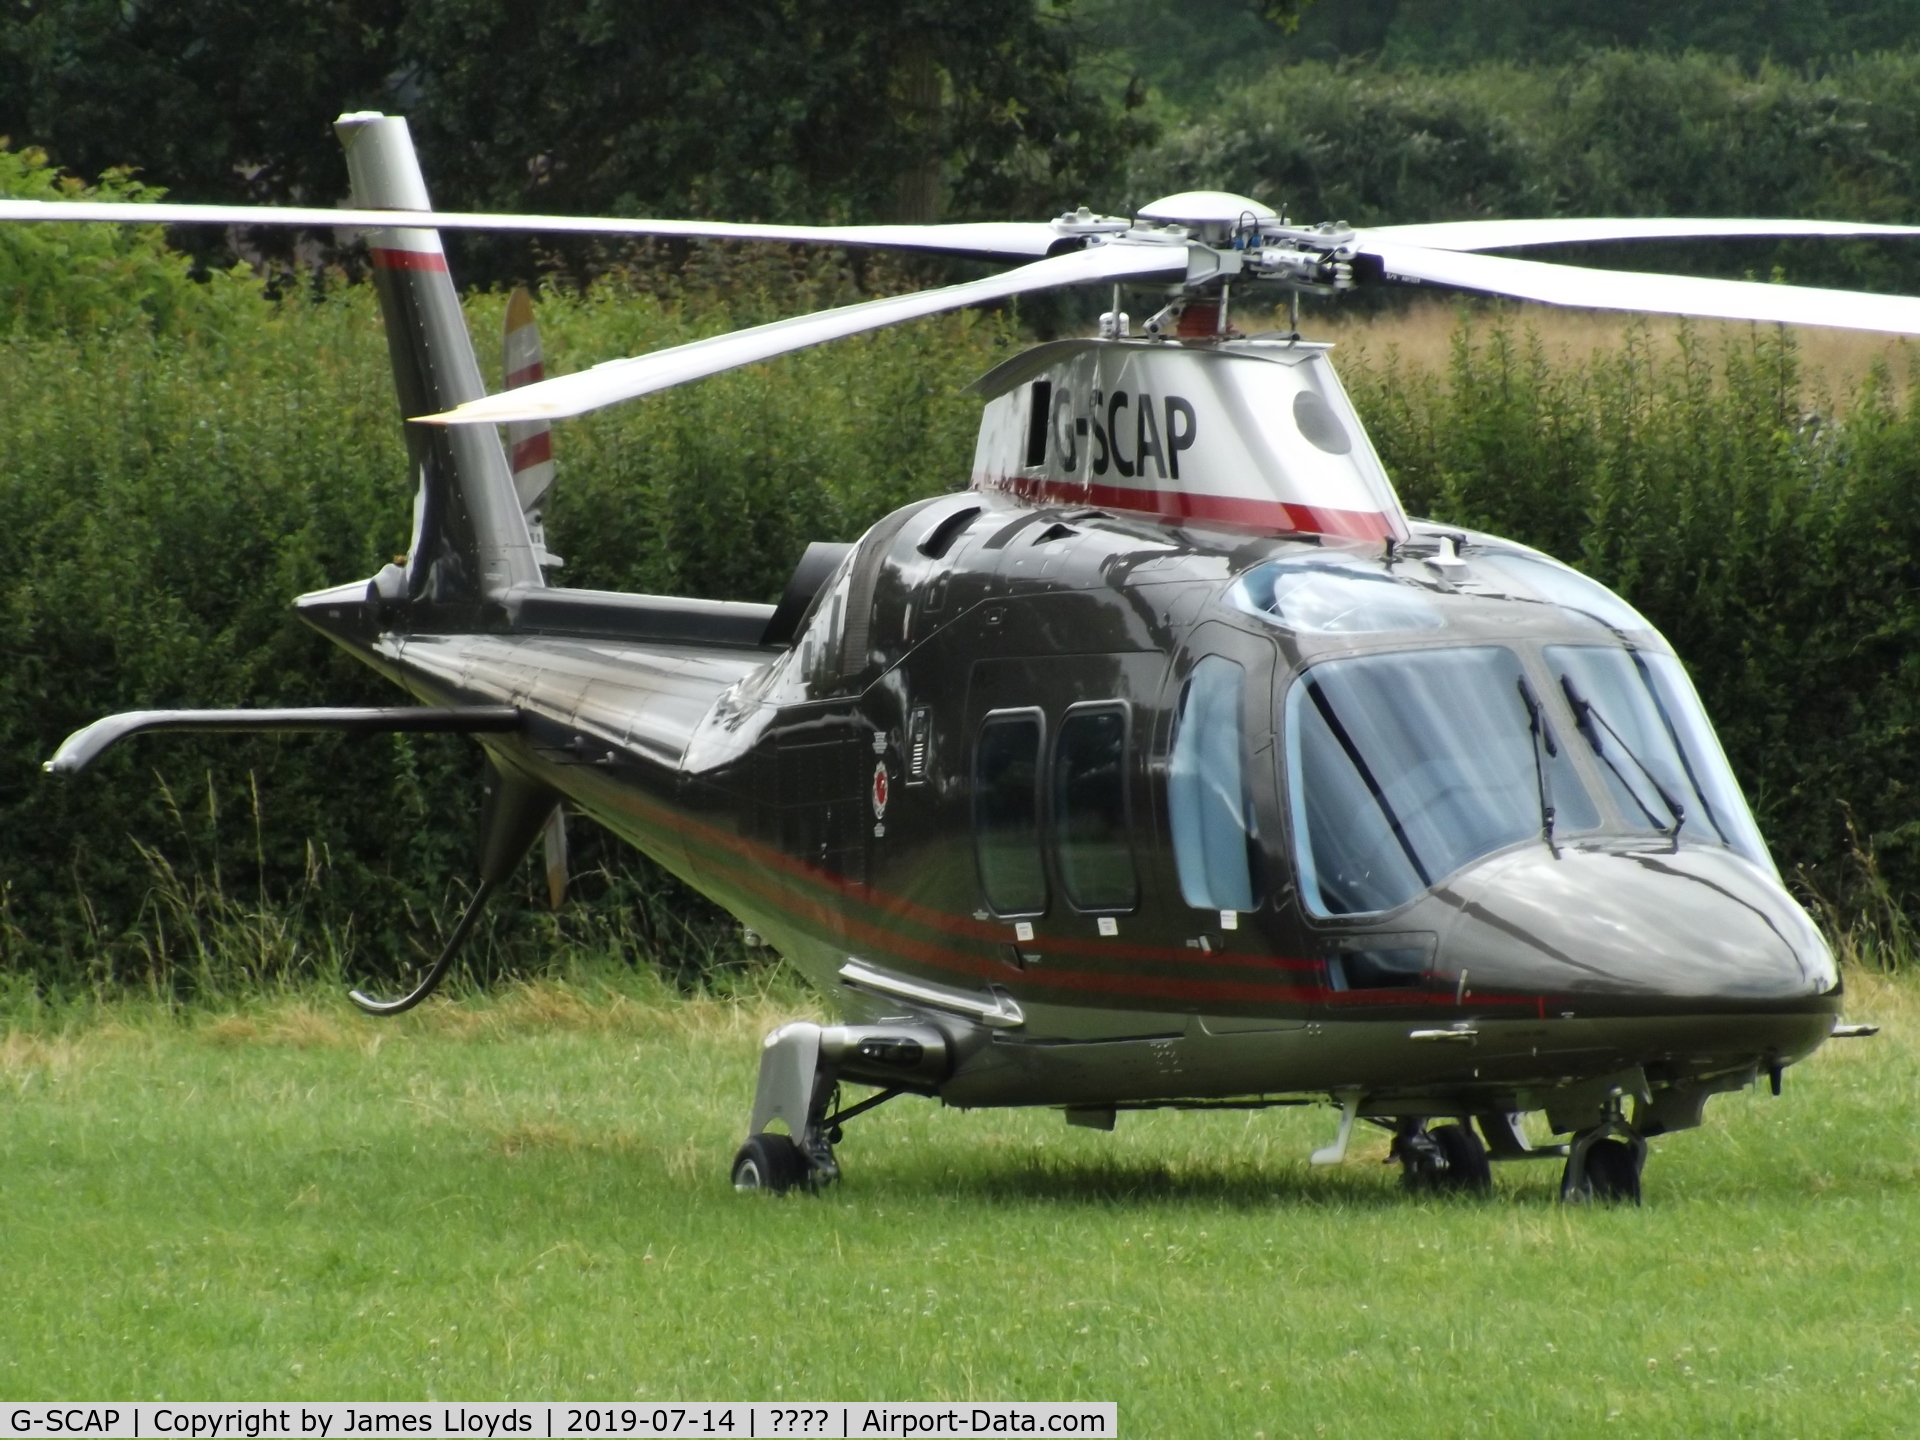 G-SCAP, 2019 Leonardo AW-109SP Grand New C/N 22396, Parked at Launton for the GP F1 Weekend.